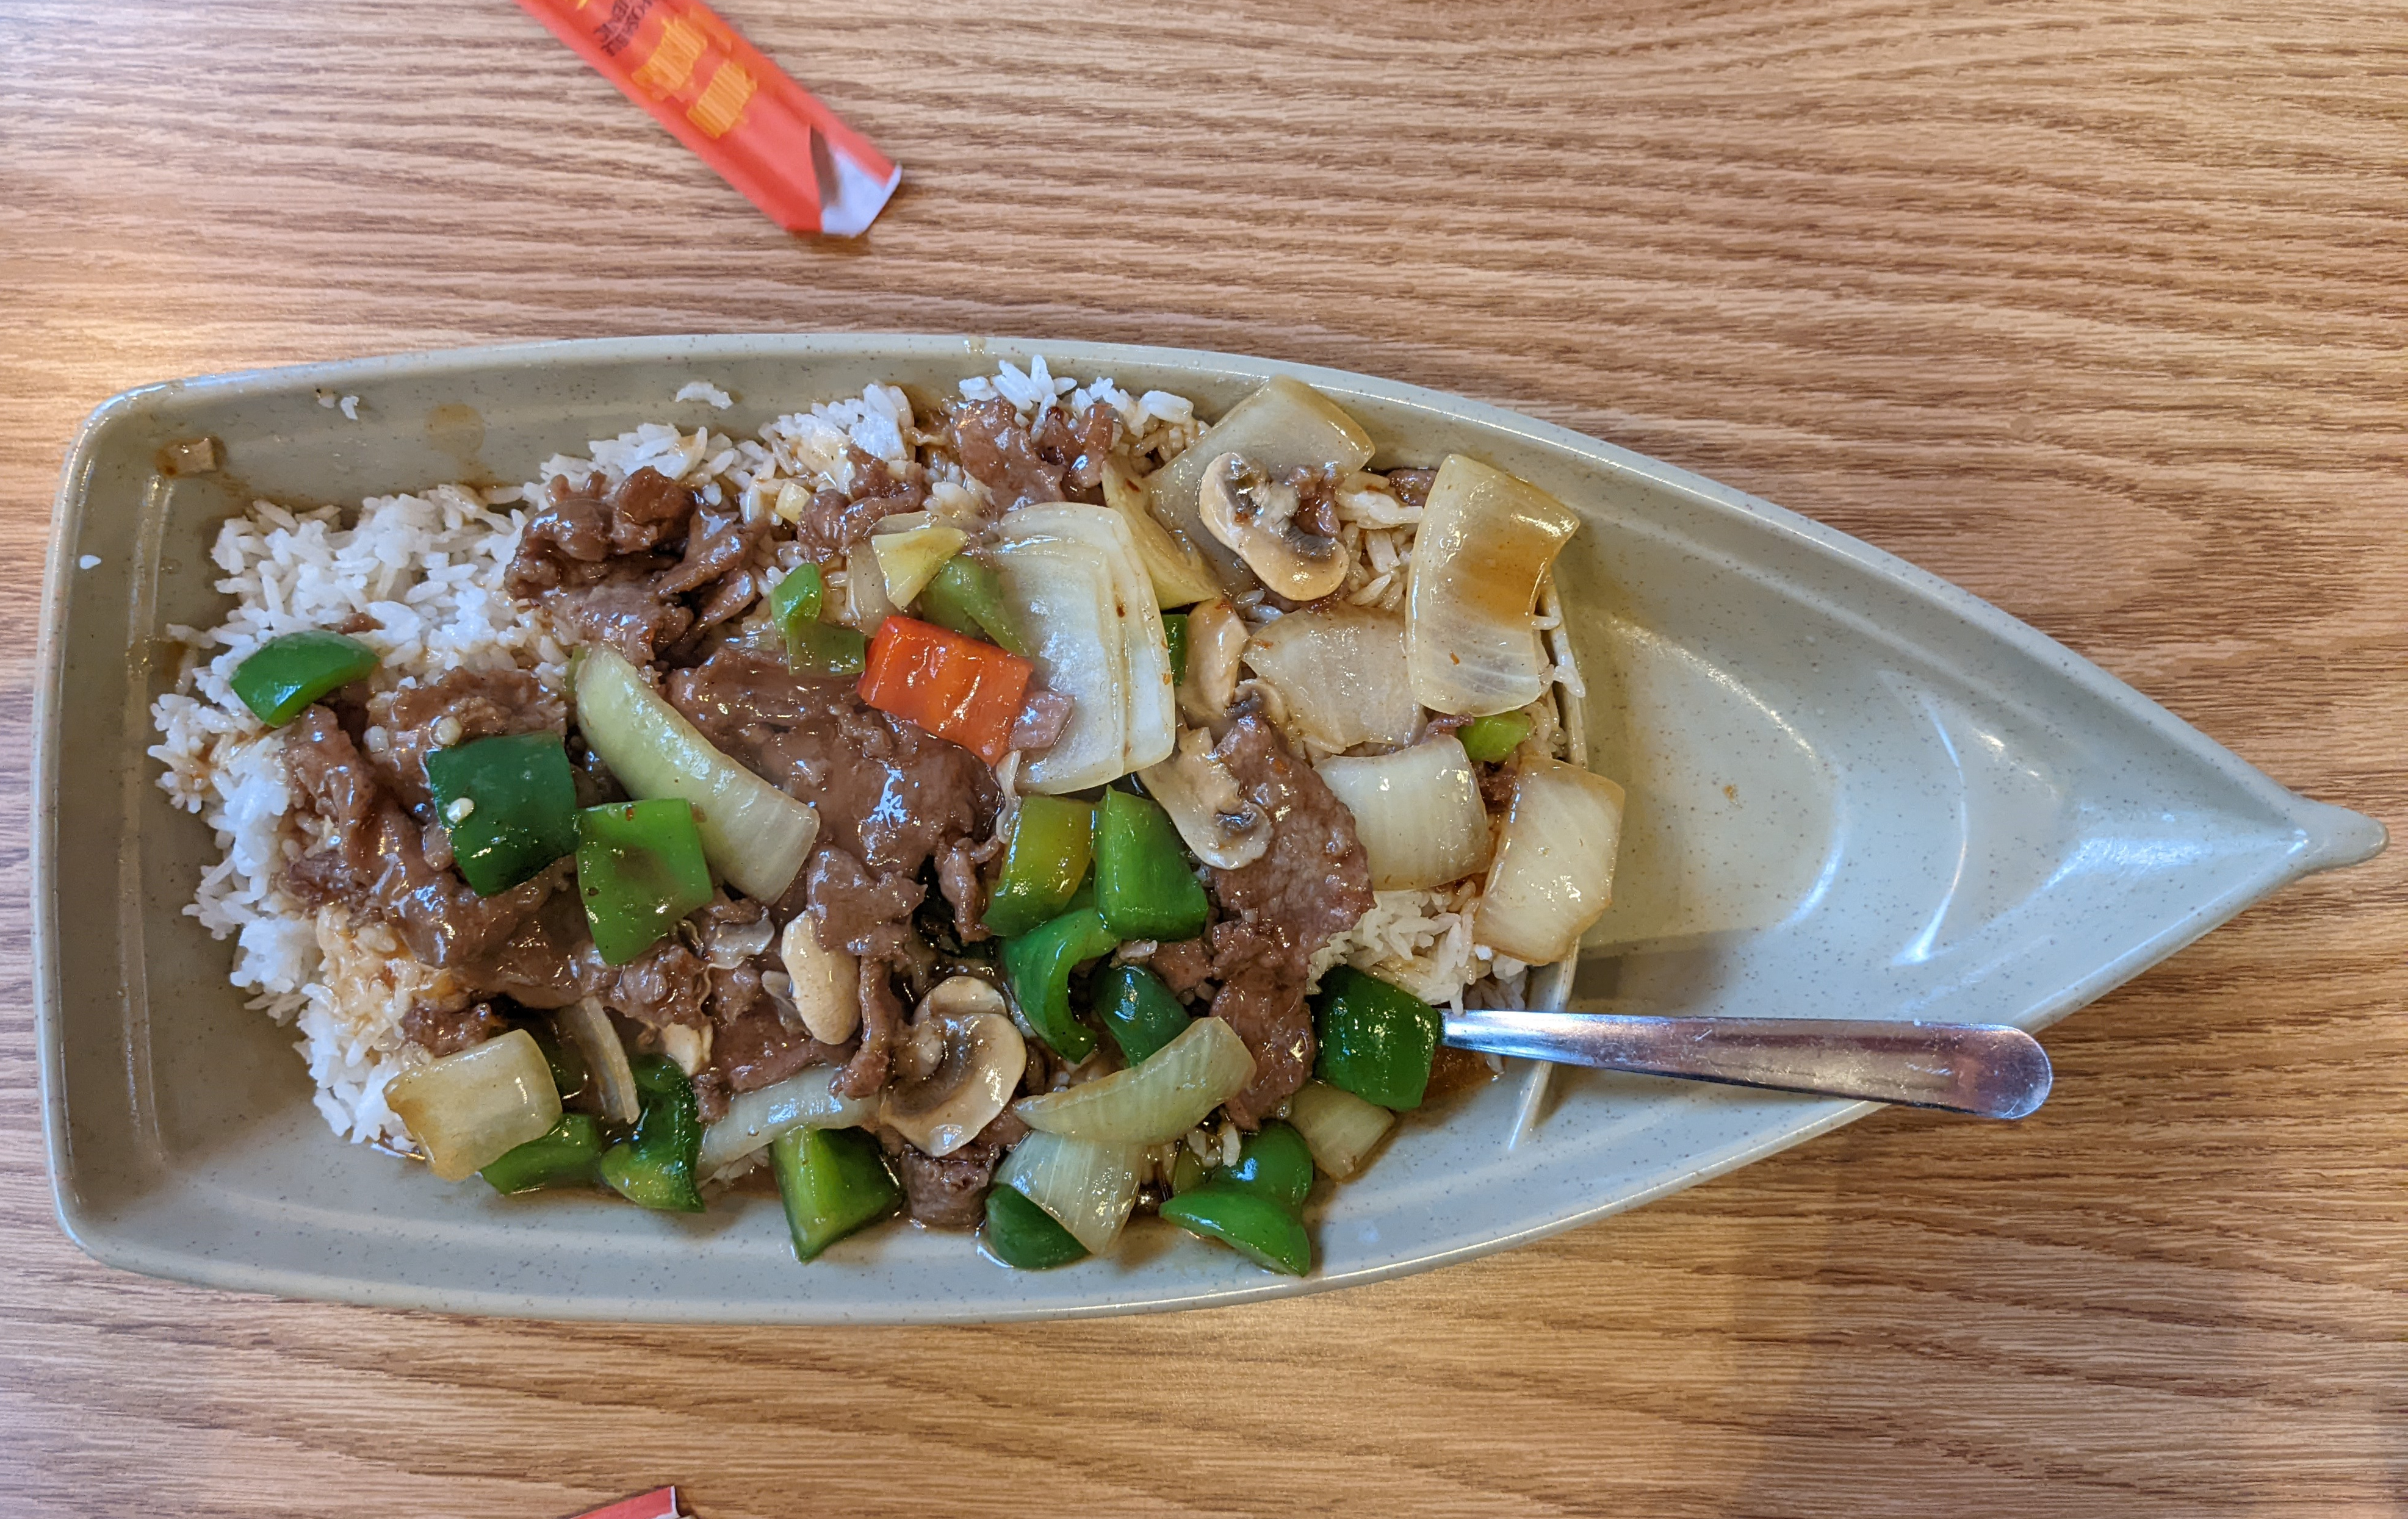 In a gray porcelain boat, there is a beef dish over rice with veggies. Photo by Tayler Neumann.